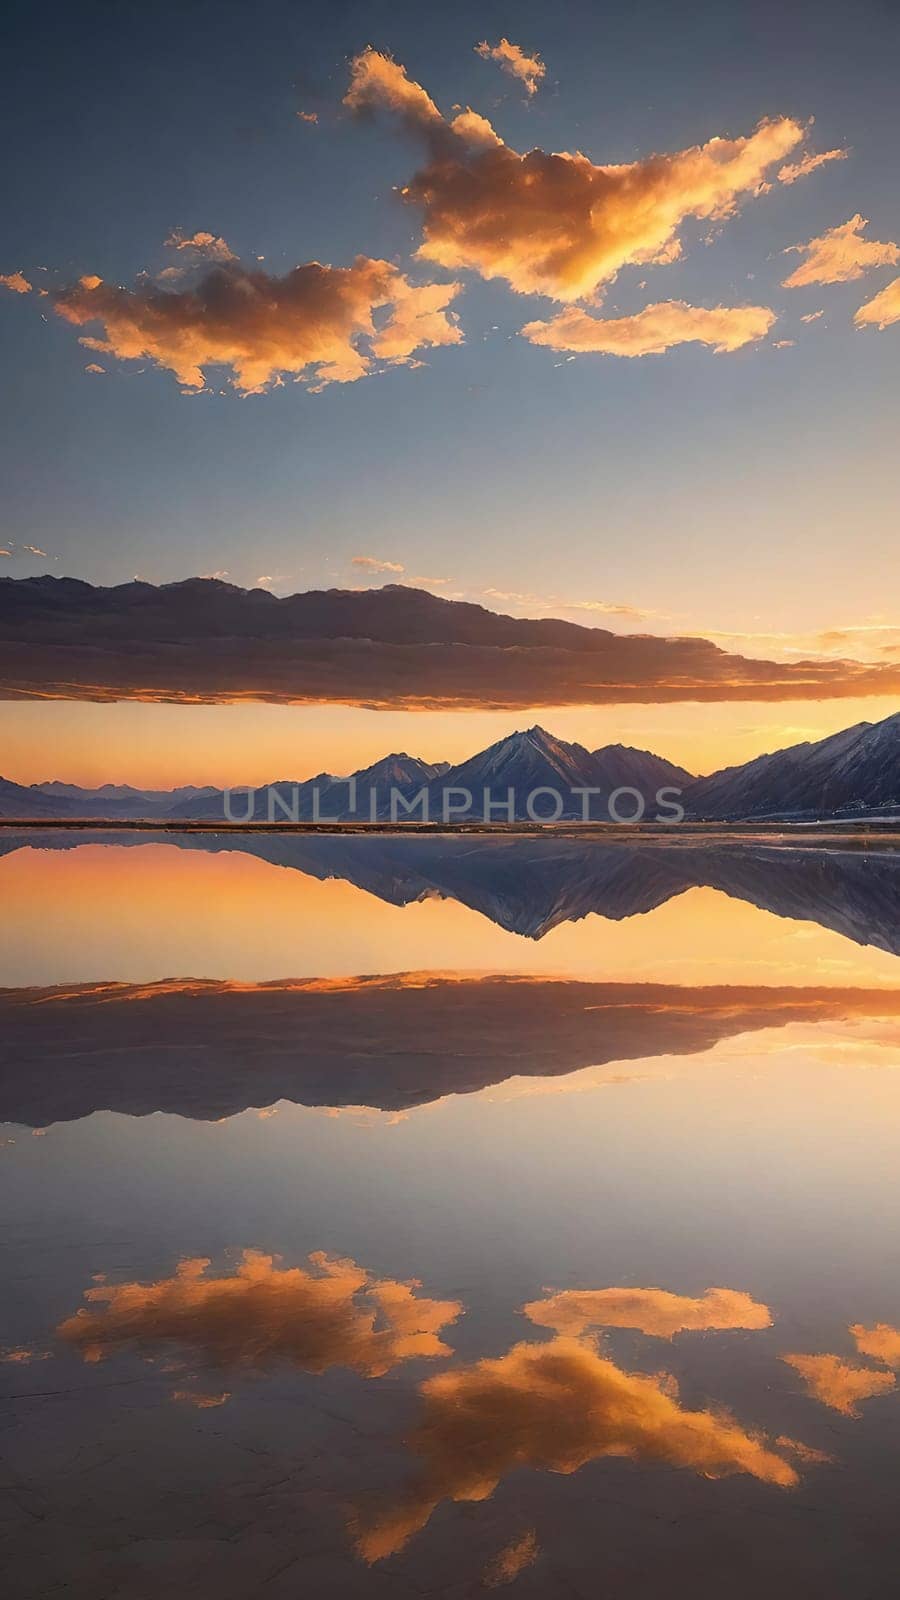 Sunset reflected in a lake with clouds and mountains in the background